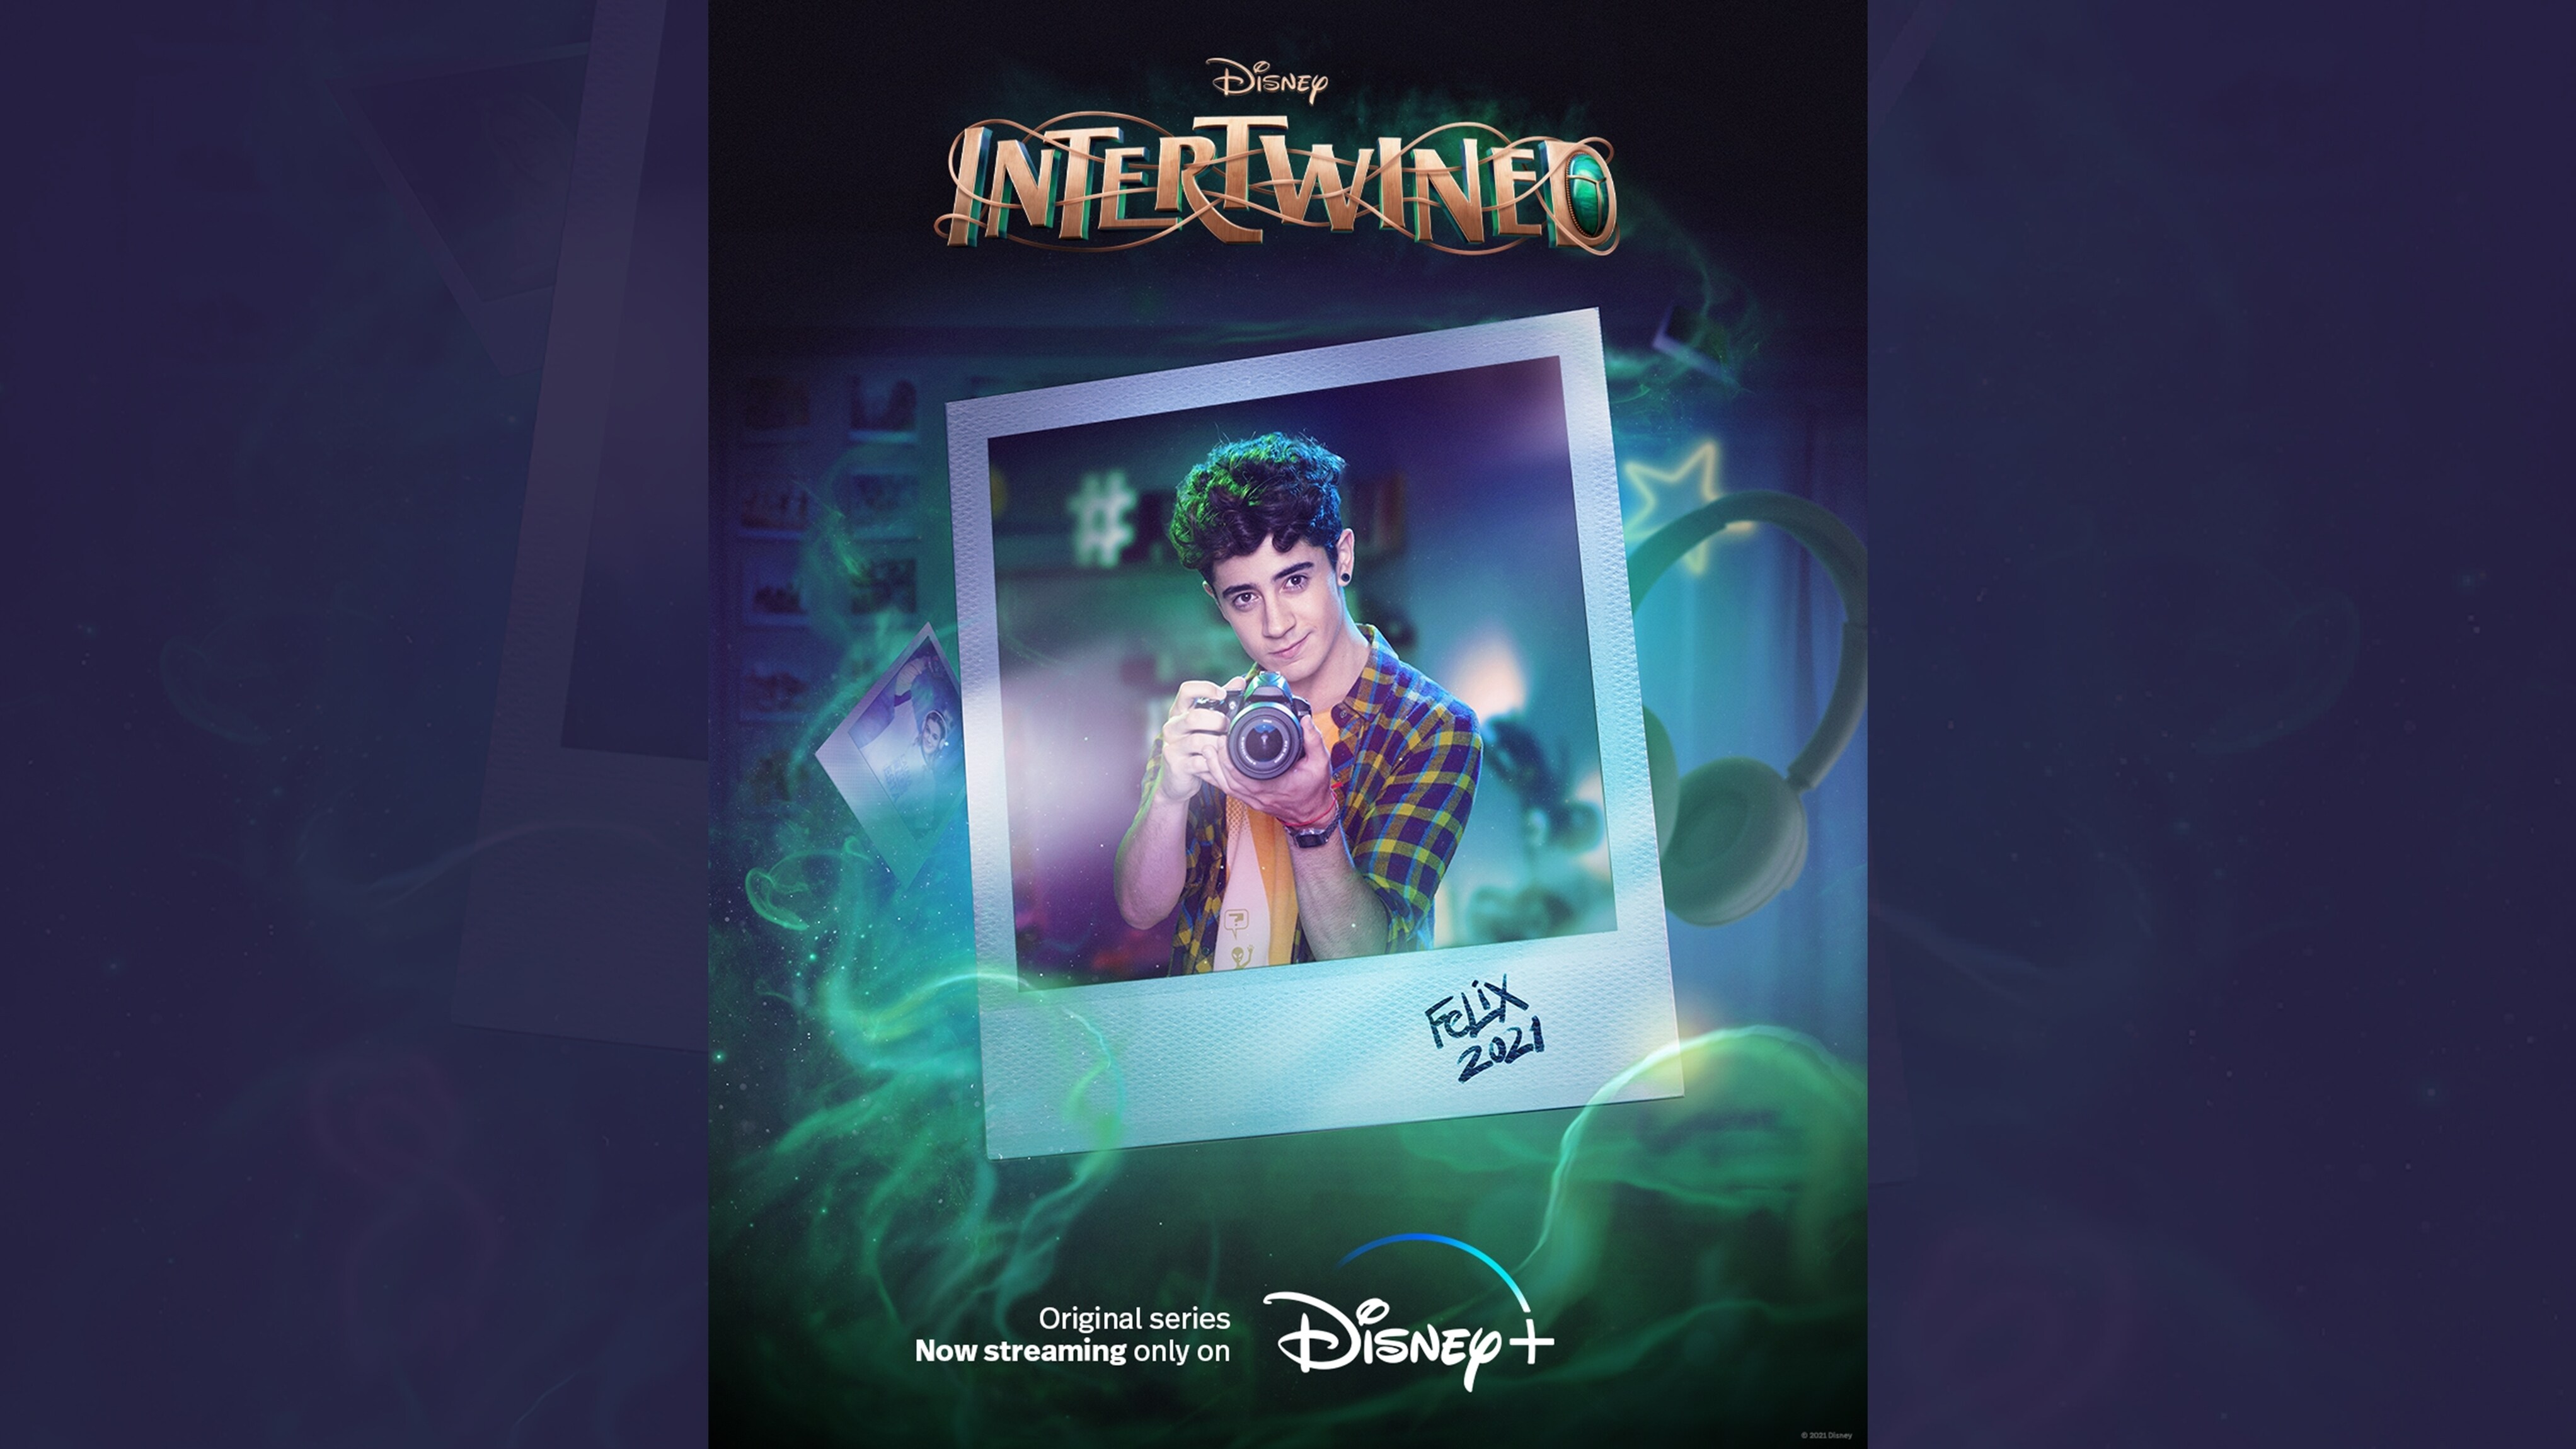 Disney | Intertwined | Felix (2021) | Original series now streaming only on Disney+